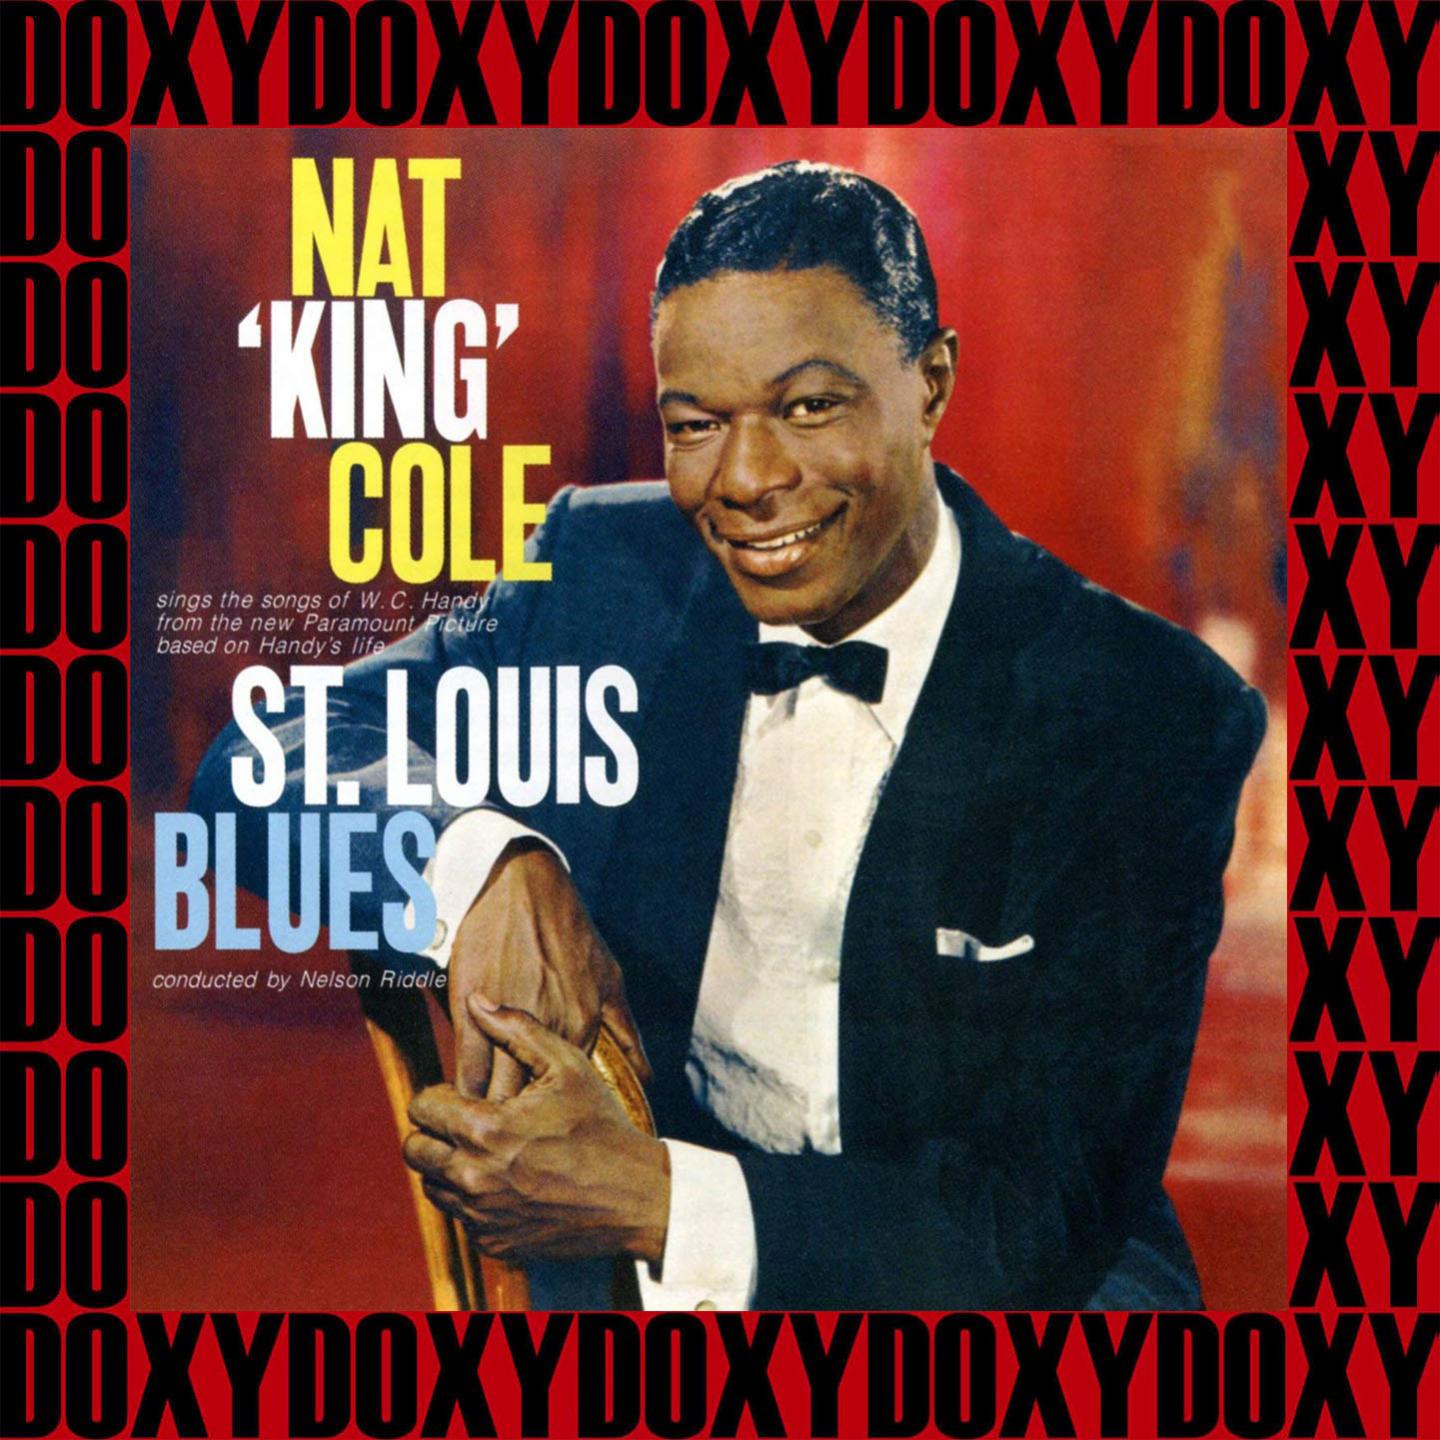 St. Louis Blues (Remastered Version) (Doxy Collection)